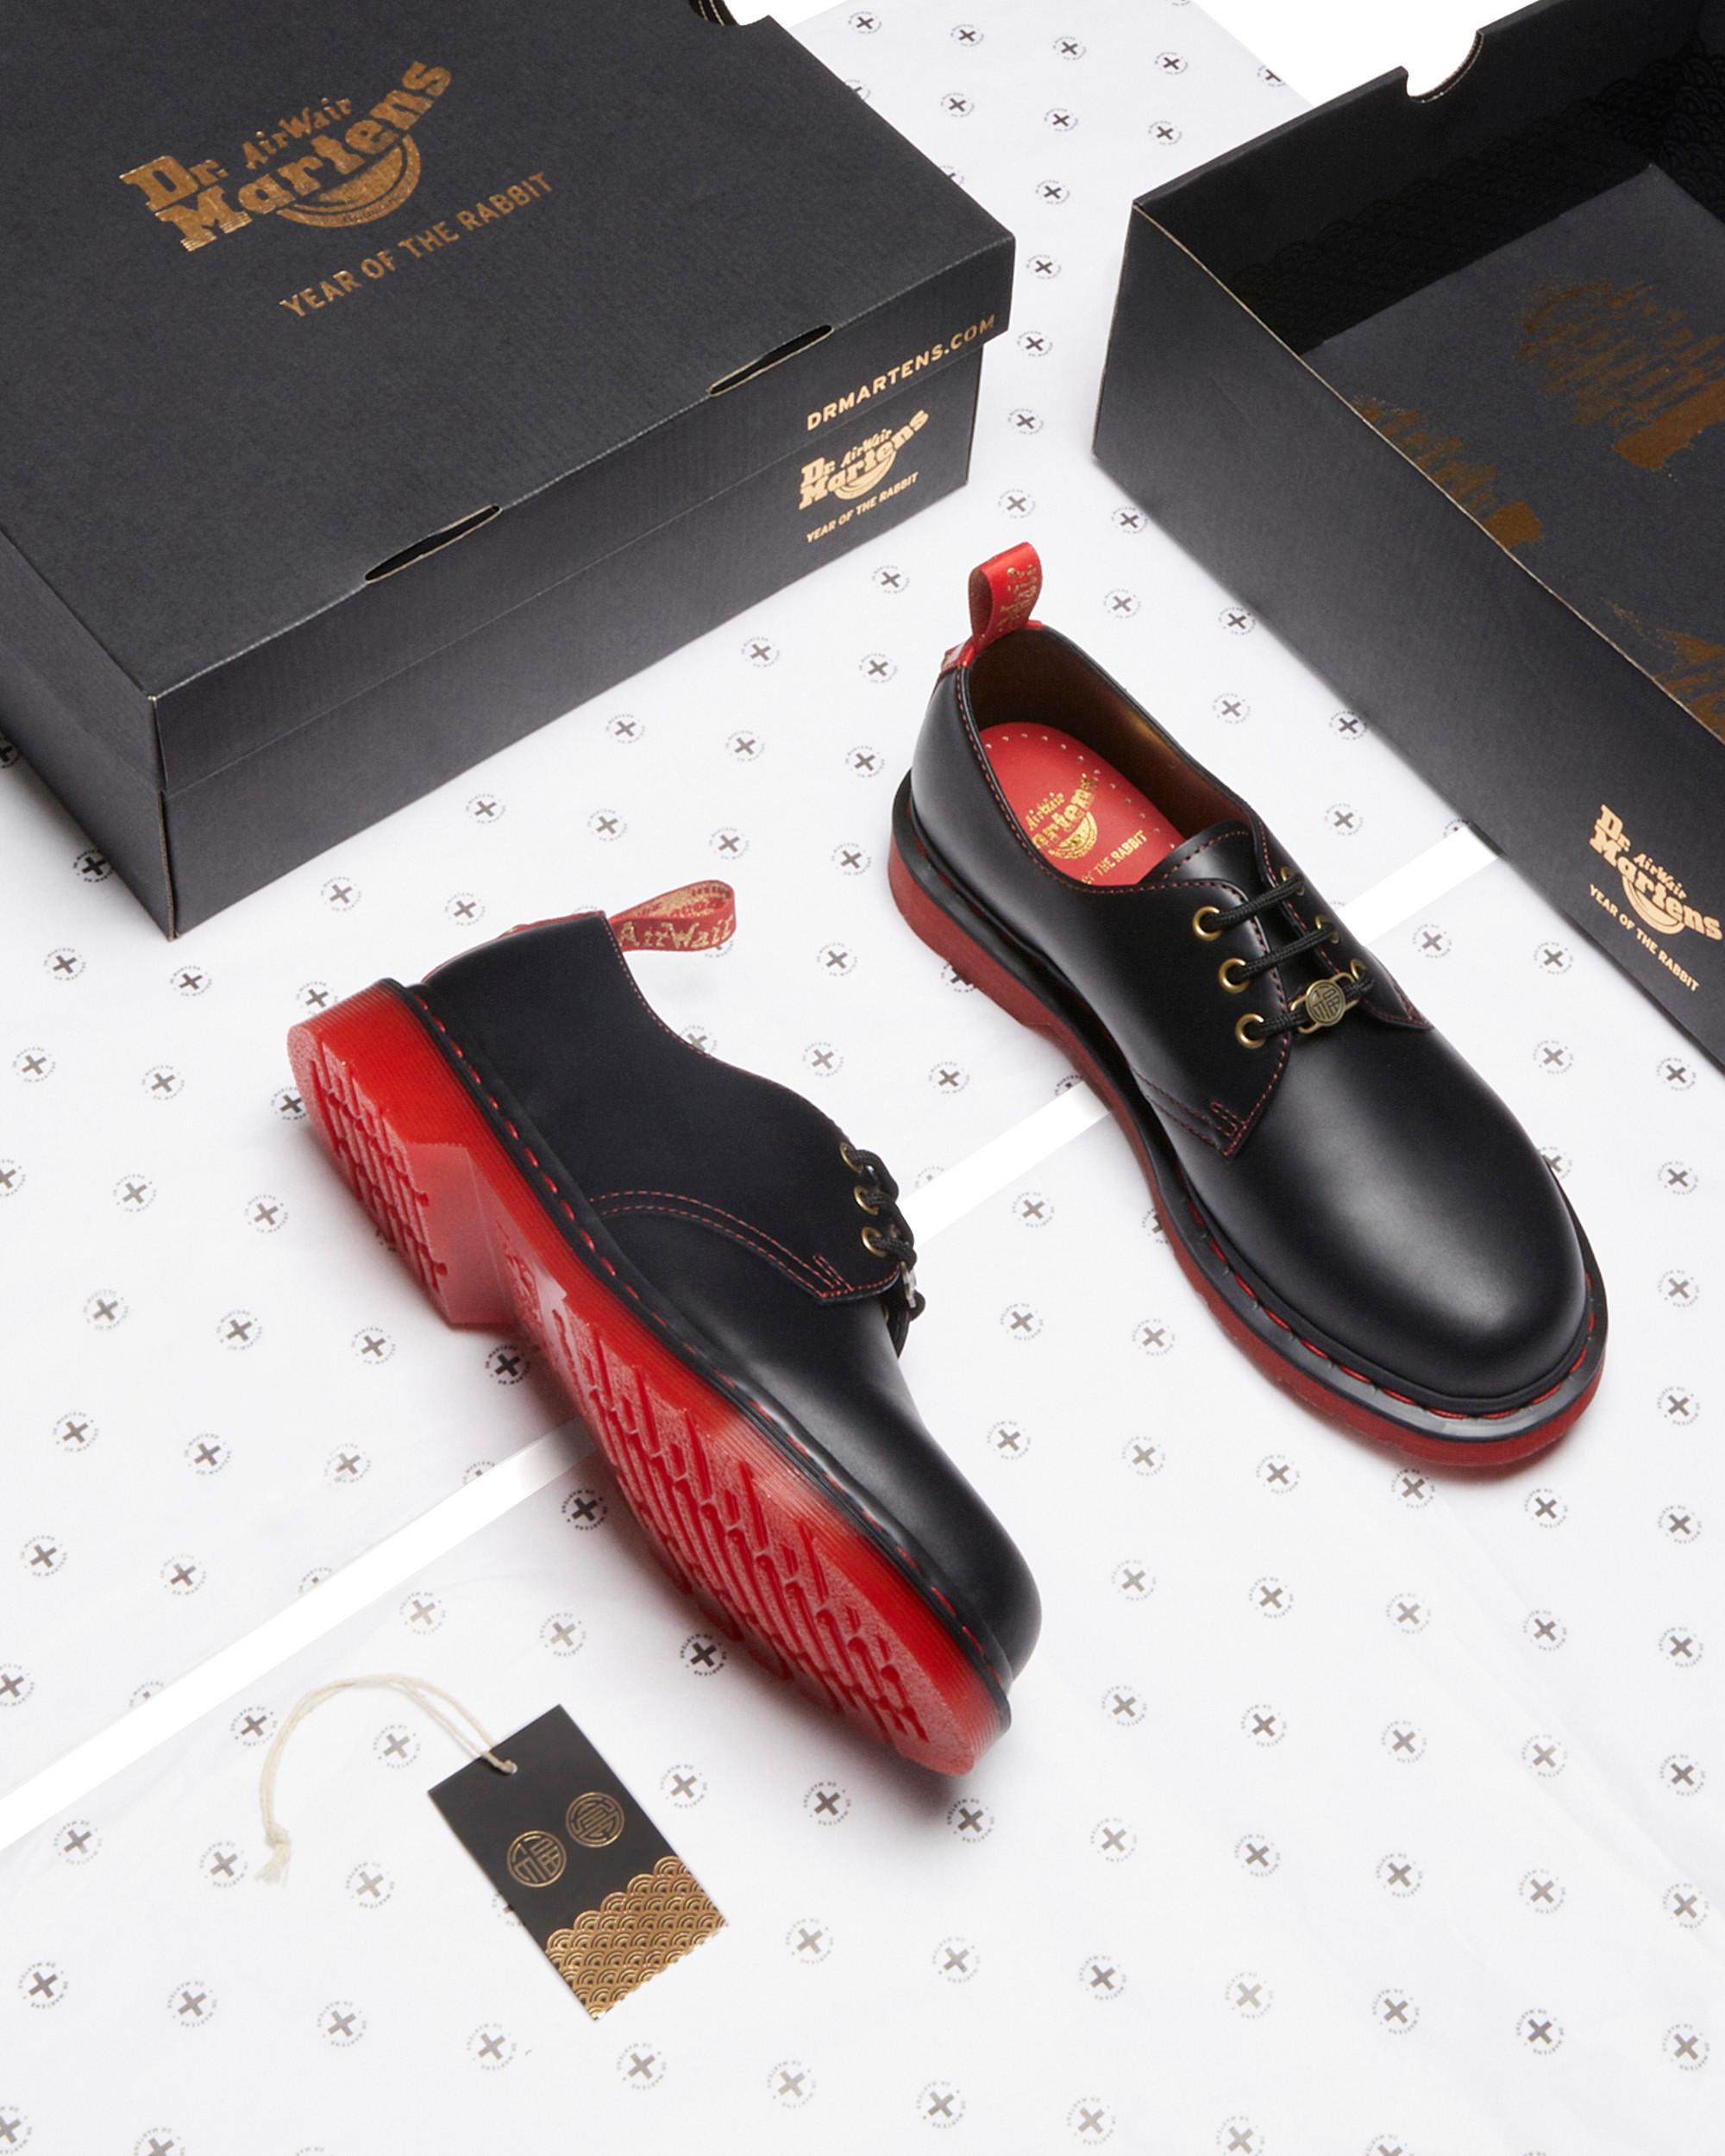 1461 Year of the Rabbit Smooth Leather Oxford Shoes1461 Year of the Rabbit Smooth Leather Oxford Shoes Dr. Martens